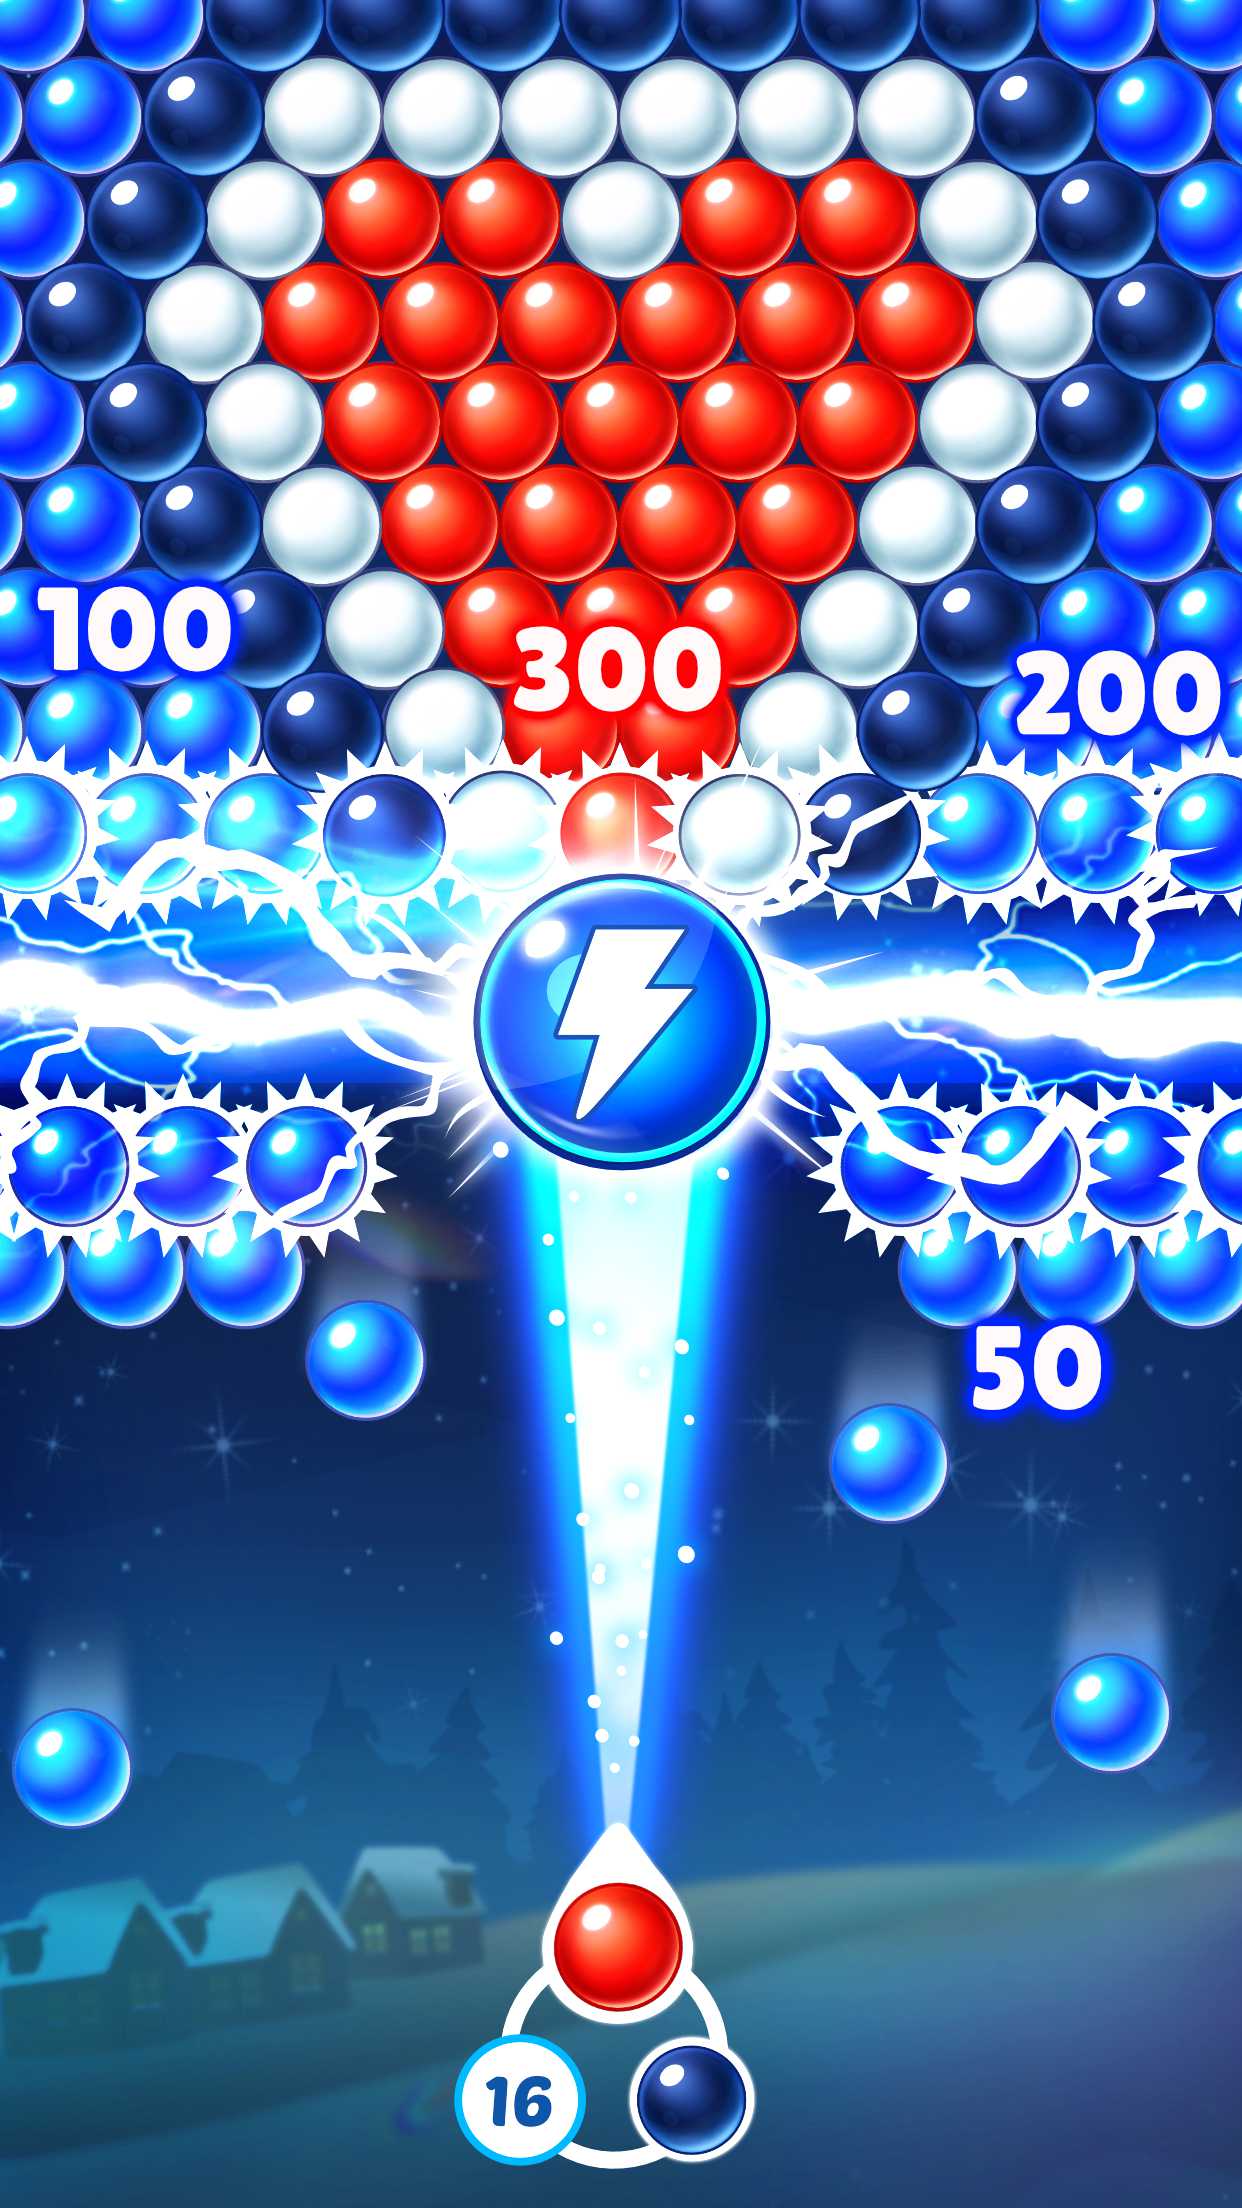 free Pastry Pop Blast - Bubble Shooter for iphone download